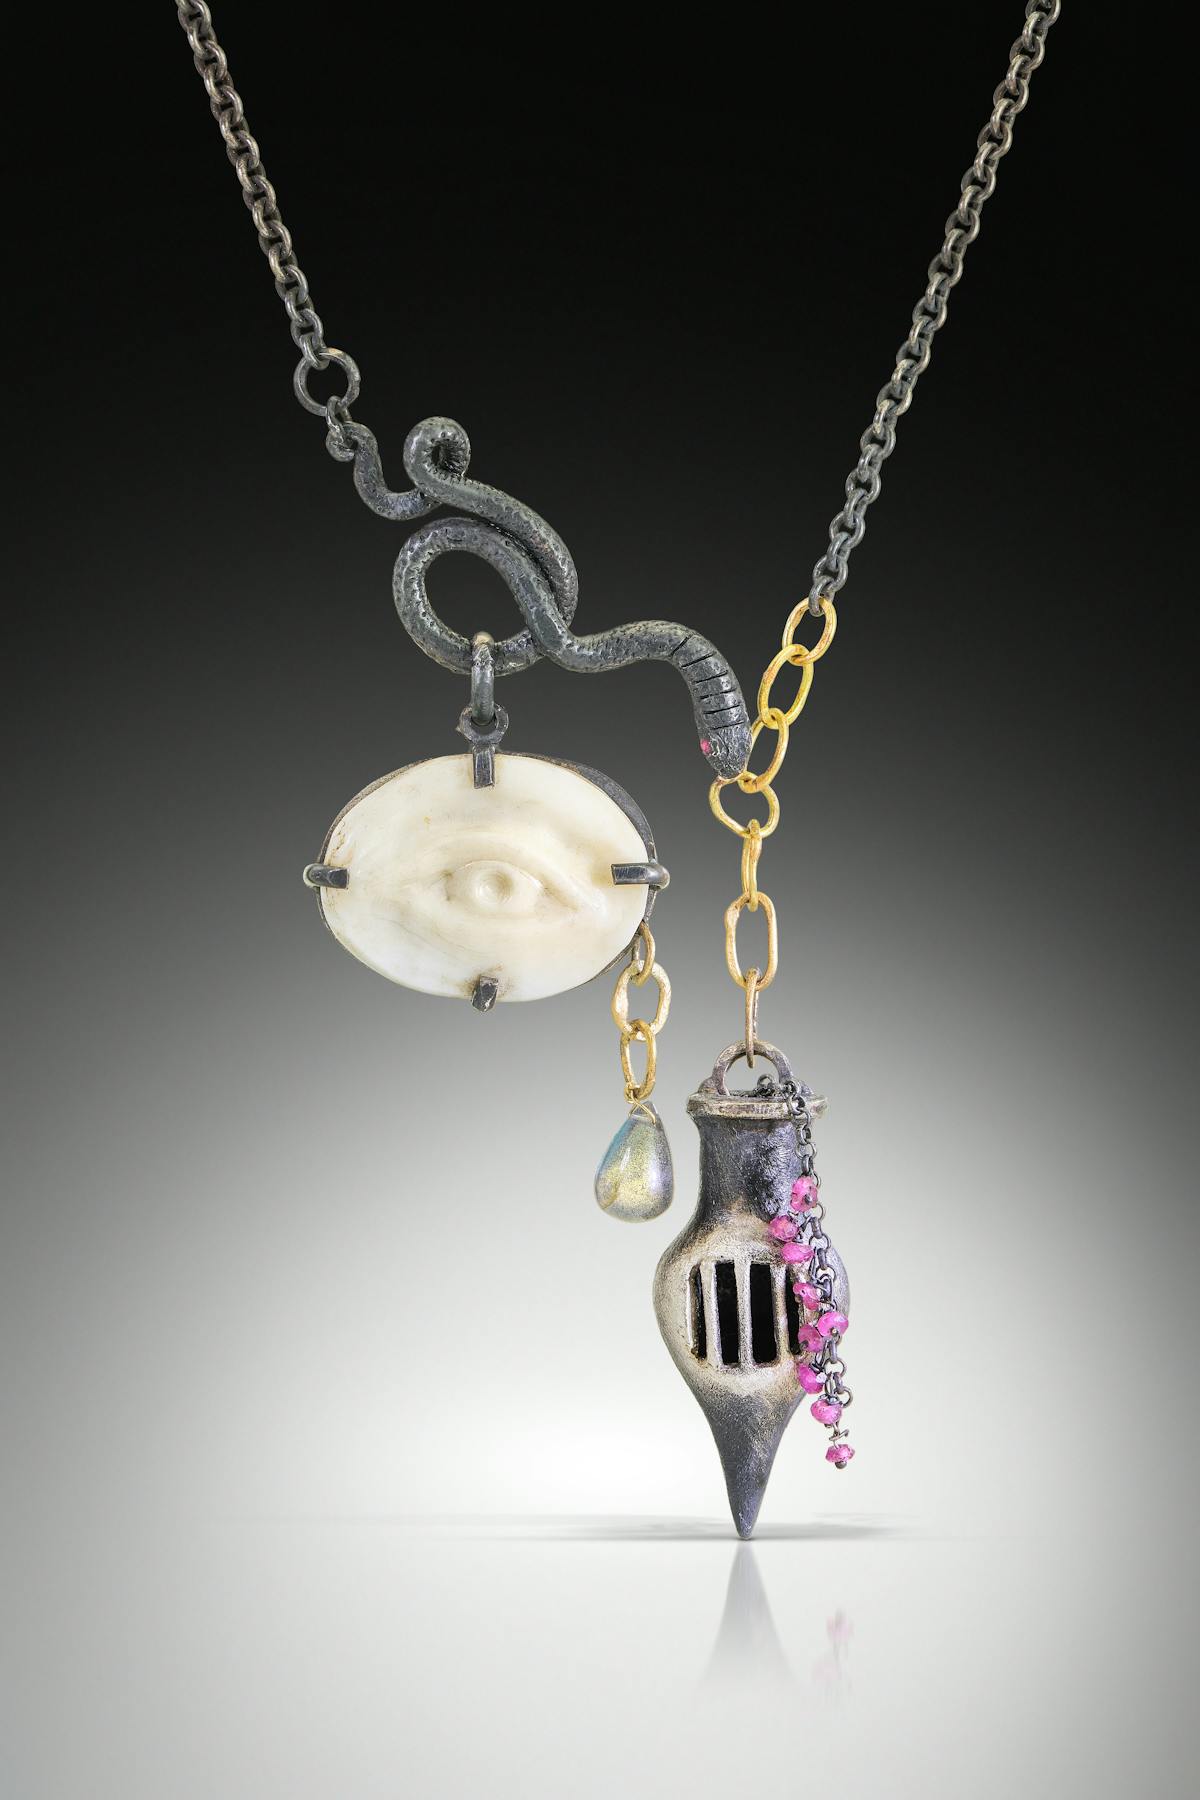 art jewelry necklace feauturing chain with various pendants including eye engraved in shell coiled snack tear drop and small vessel with prison bars